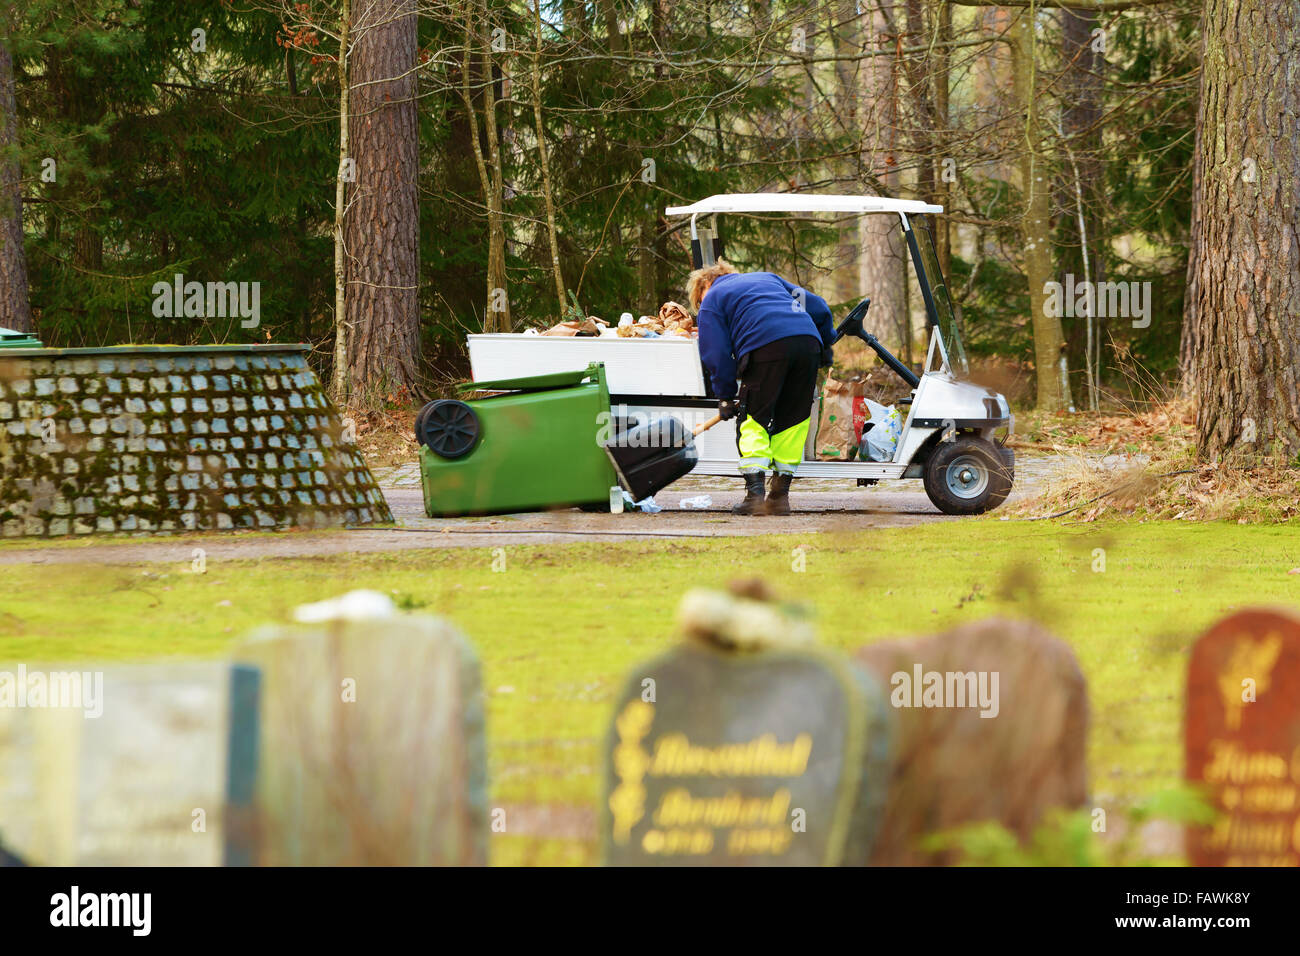 Ronneby, Sweden - December 29, 2015: Unknown female graveyard worker empty a plastic trashcan with a shovel into a small vehicle Stock Photo